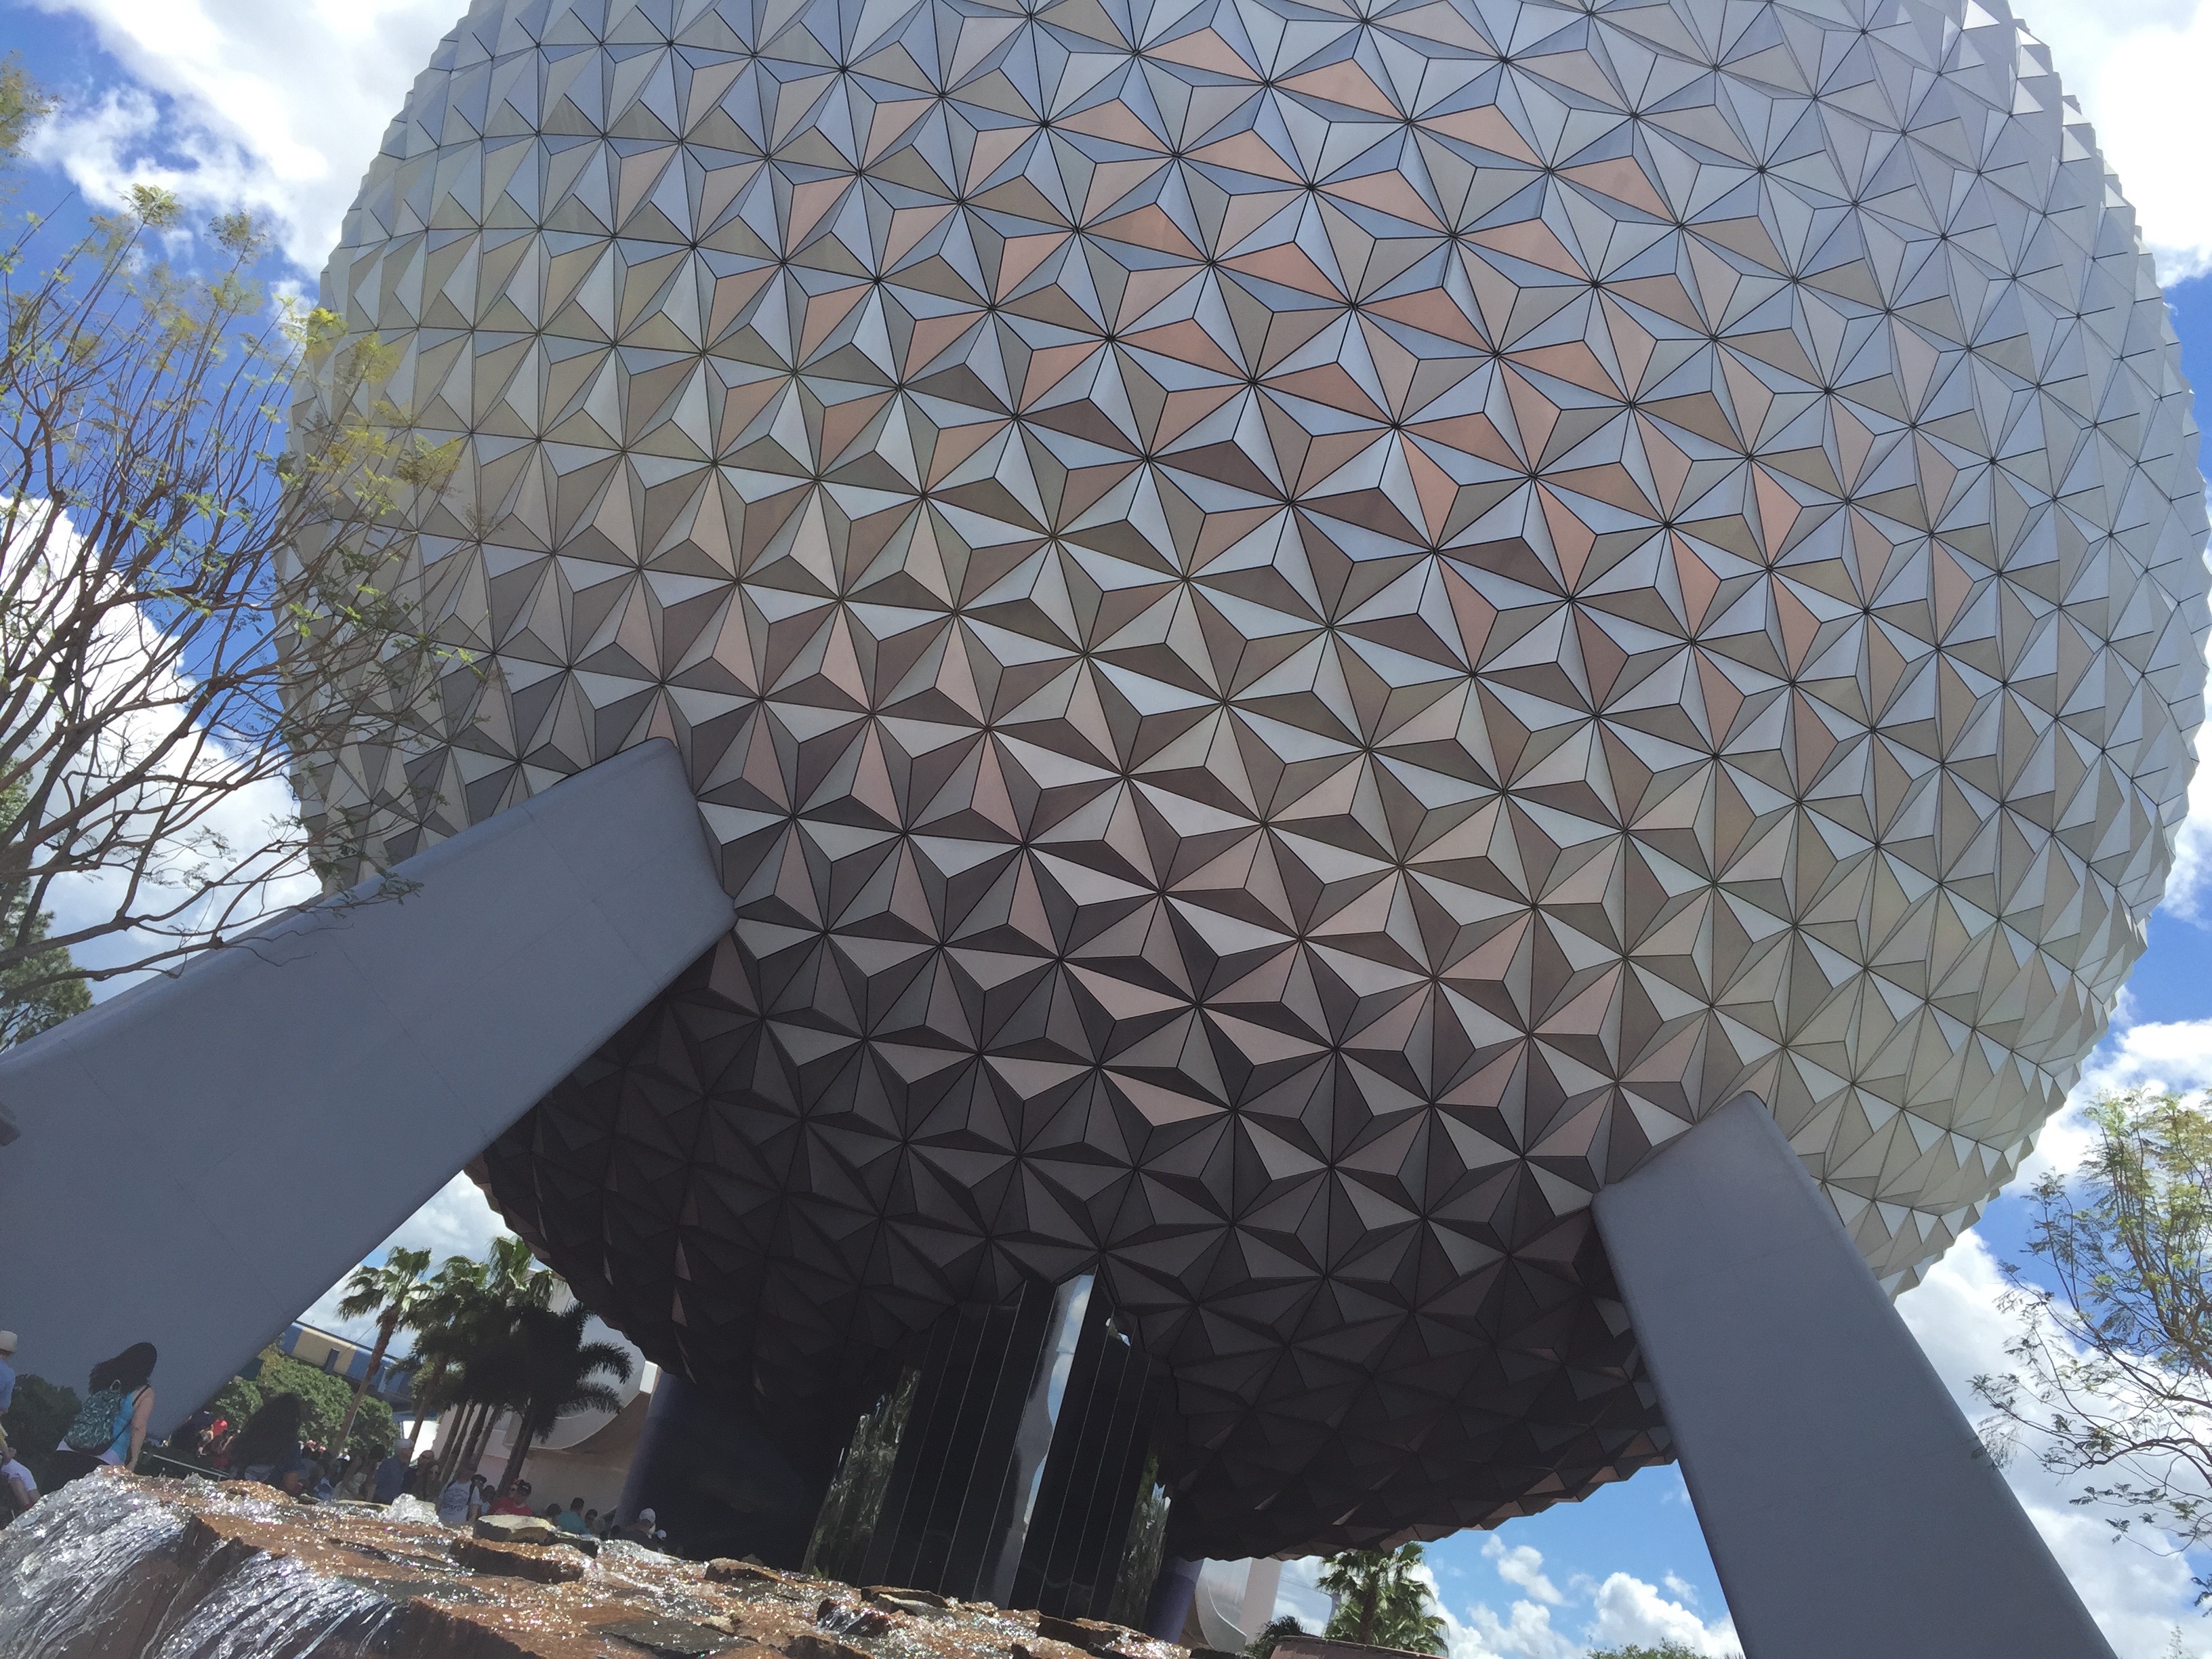 Behind The Thrills | Spaceship Earth at Epcot may close for long  refurbishment Behind The Thrills